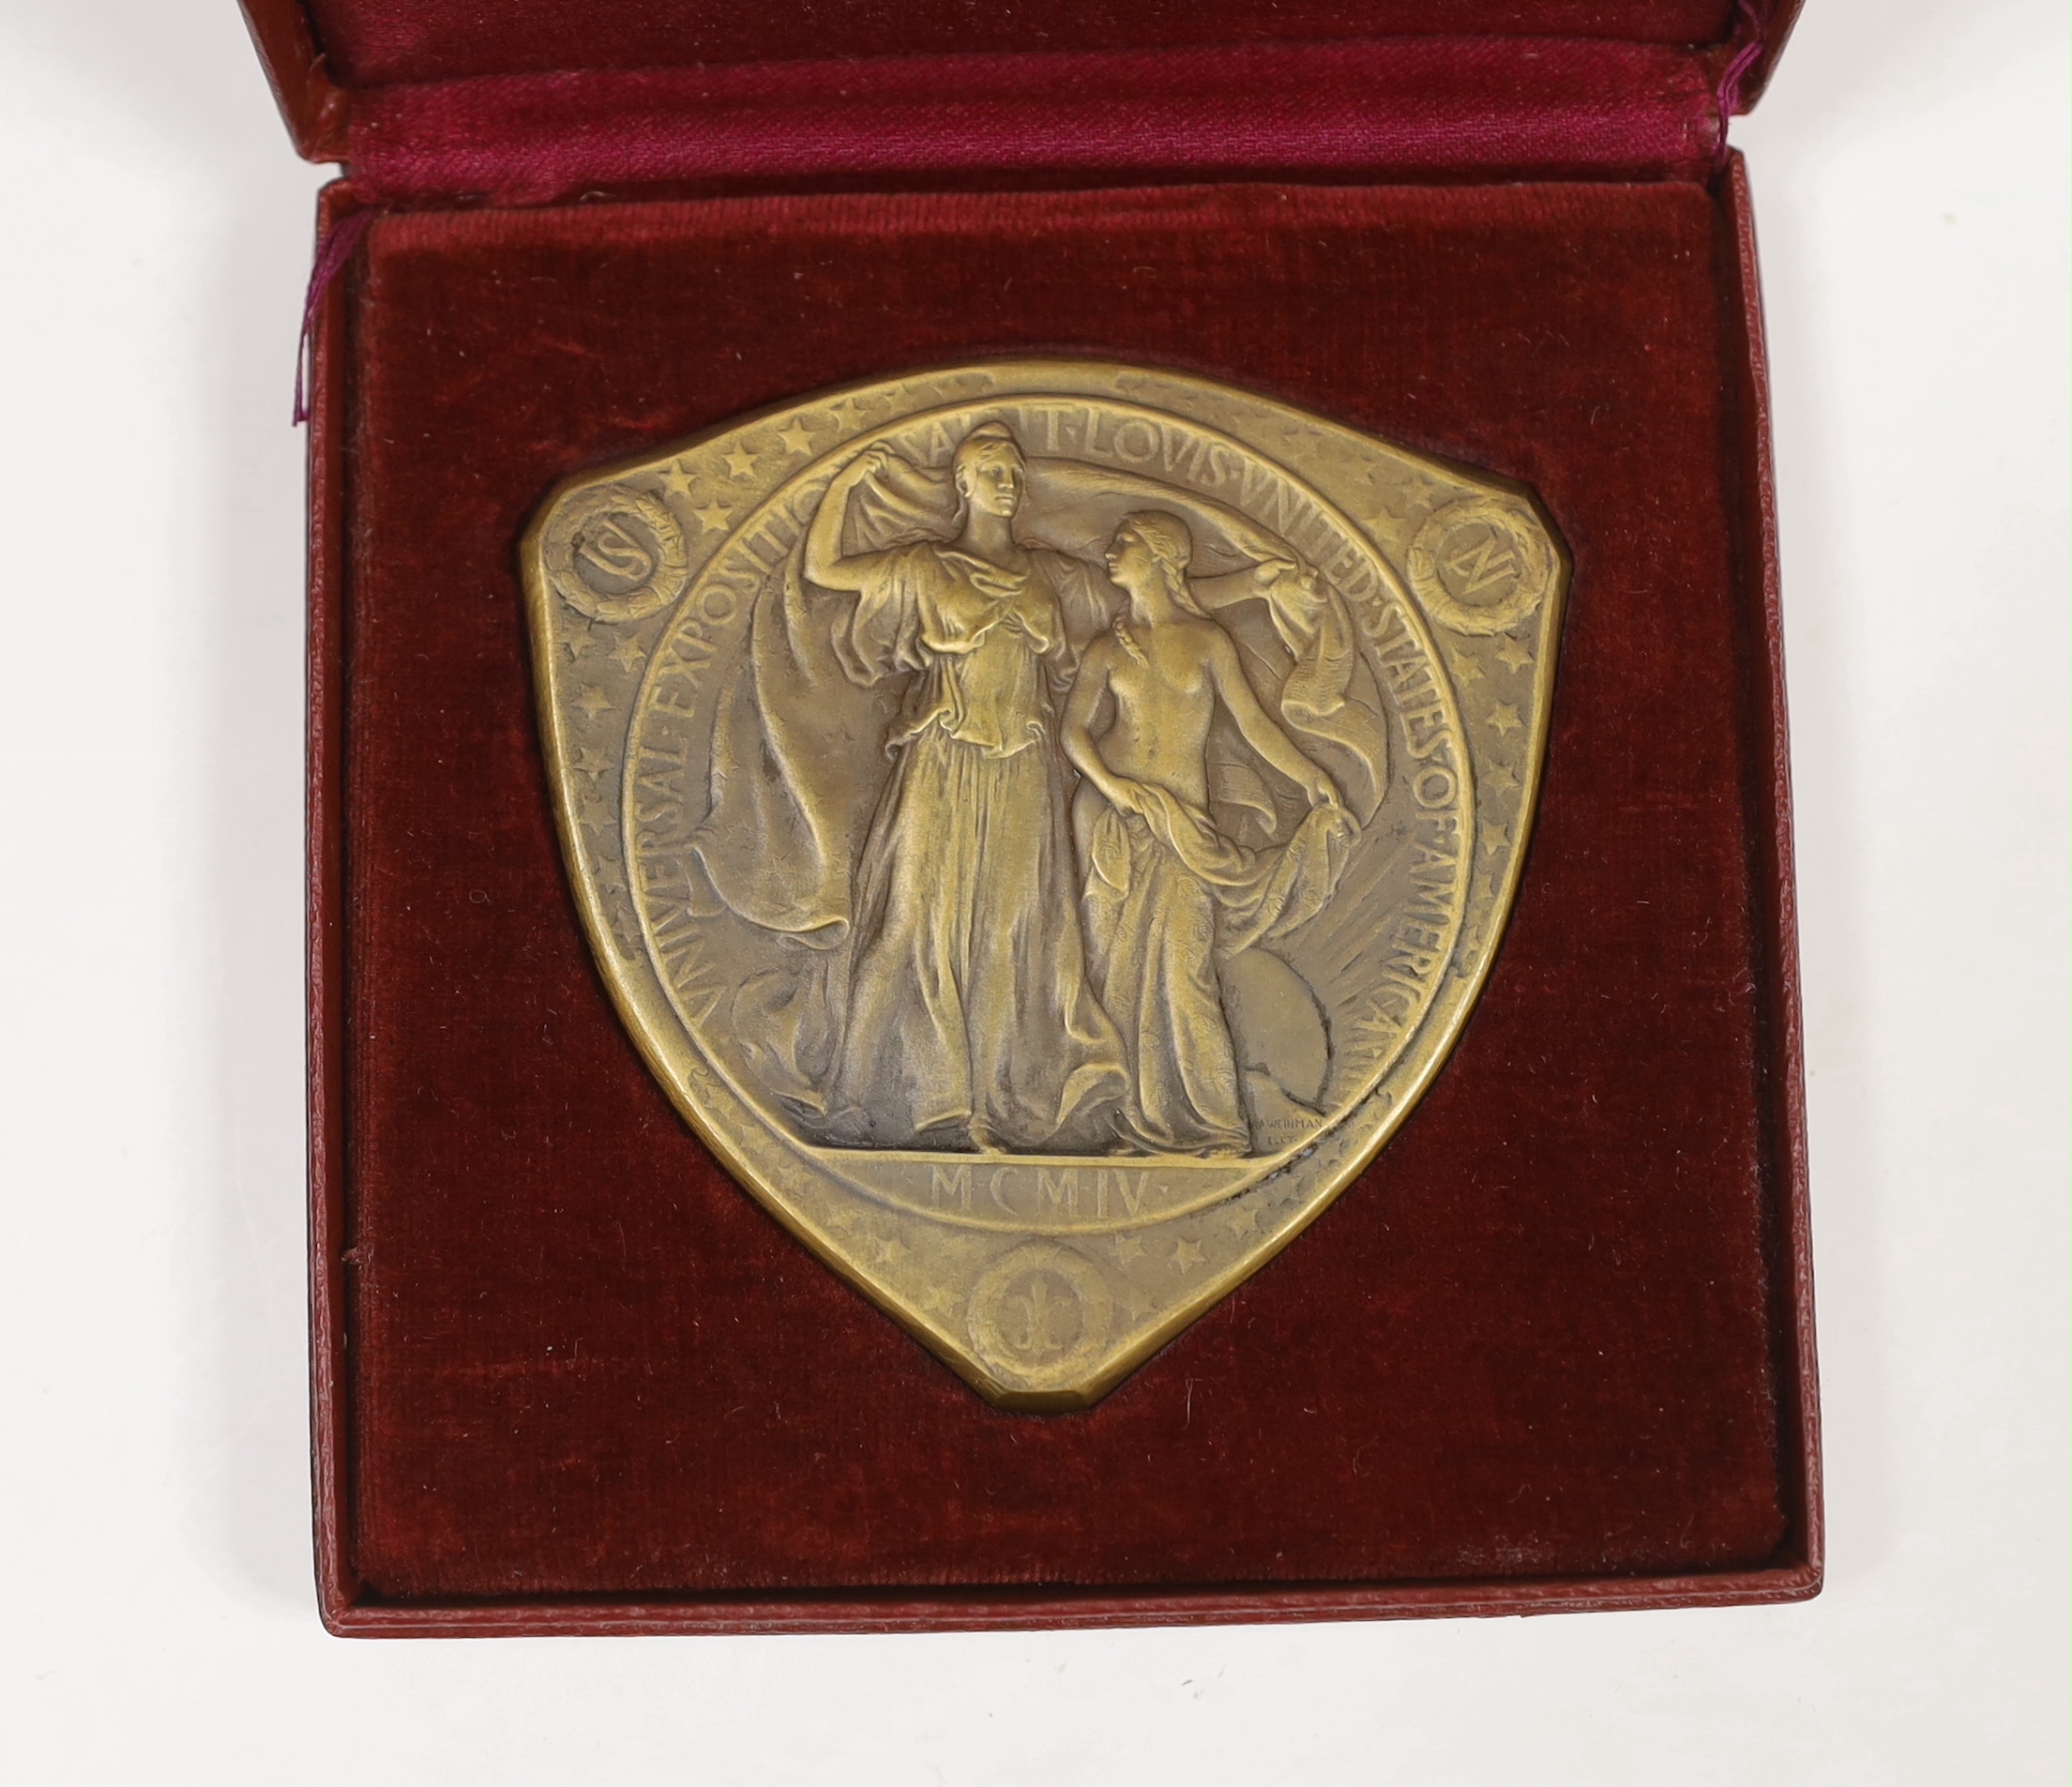 Commemorative medals, St Louis Universal Exposition 1904 bronze medal, in case of issue with citation scroll awarded to Joseph H Mott as collaborator with Doulton and company Ltd and accompanying letter.